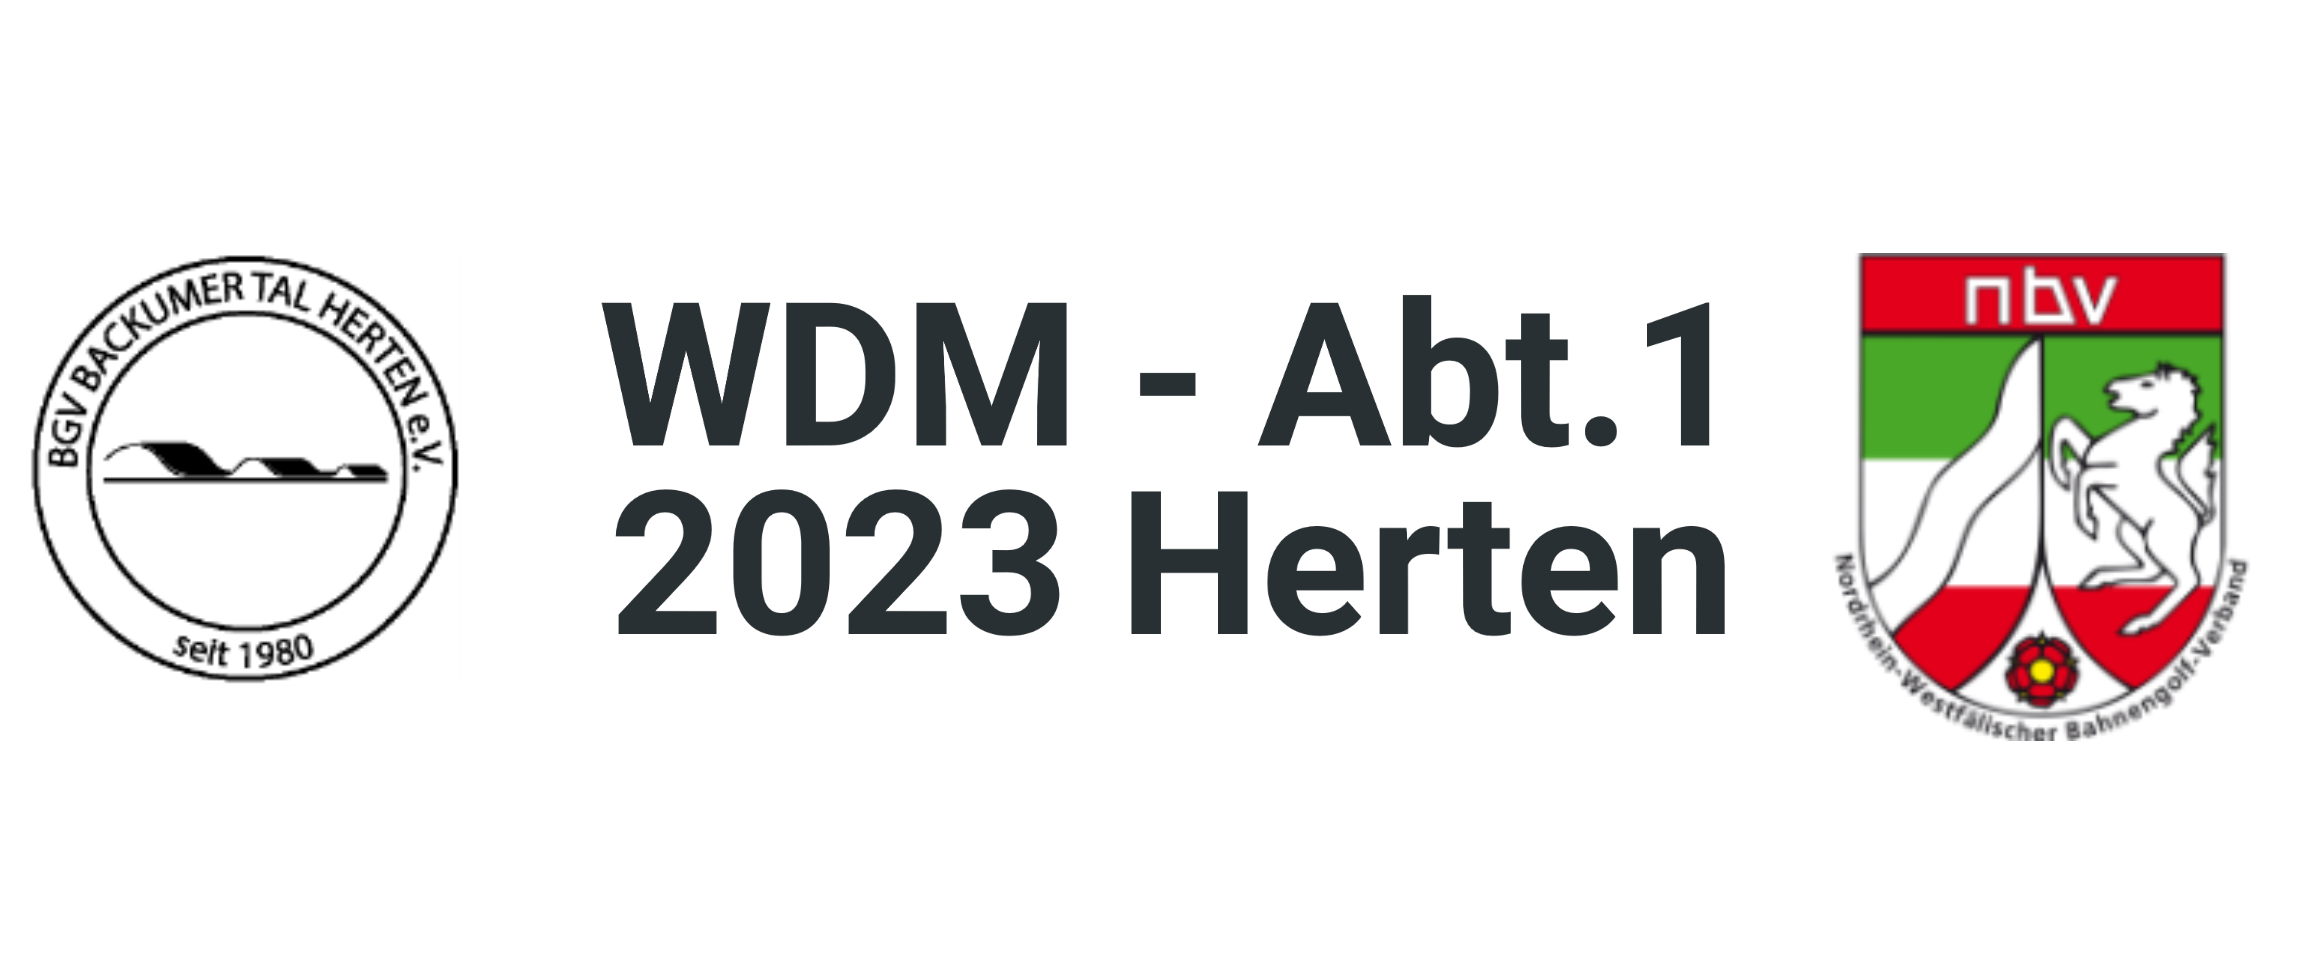 You are currently viewing WDM-Abt.1 2023 in Herten